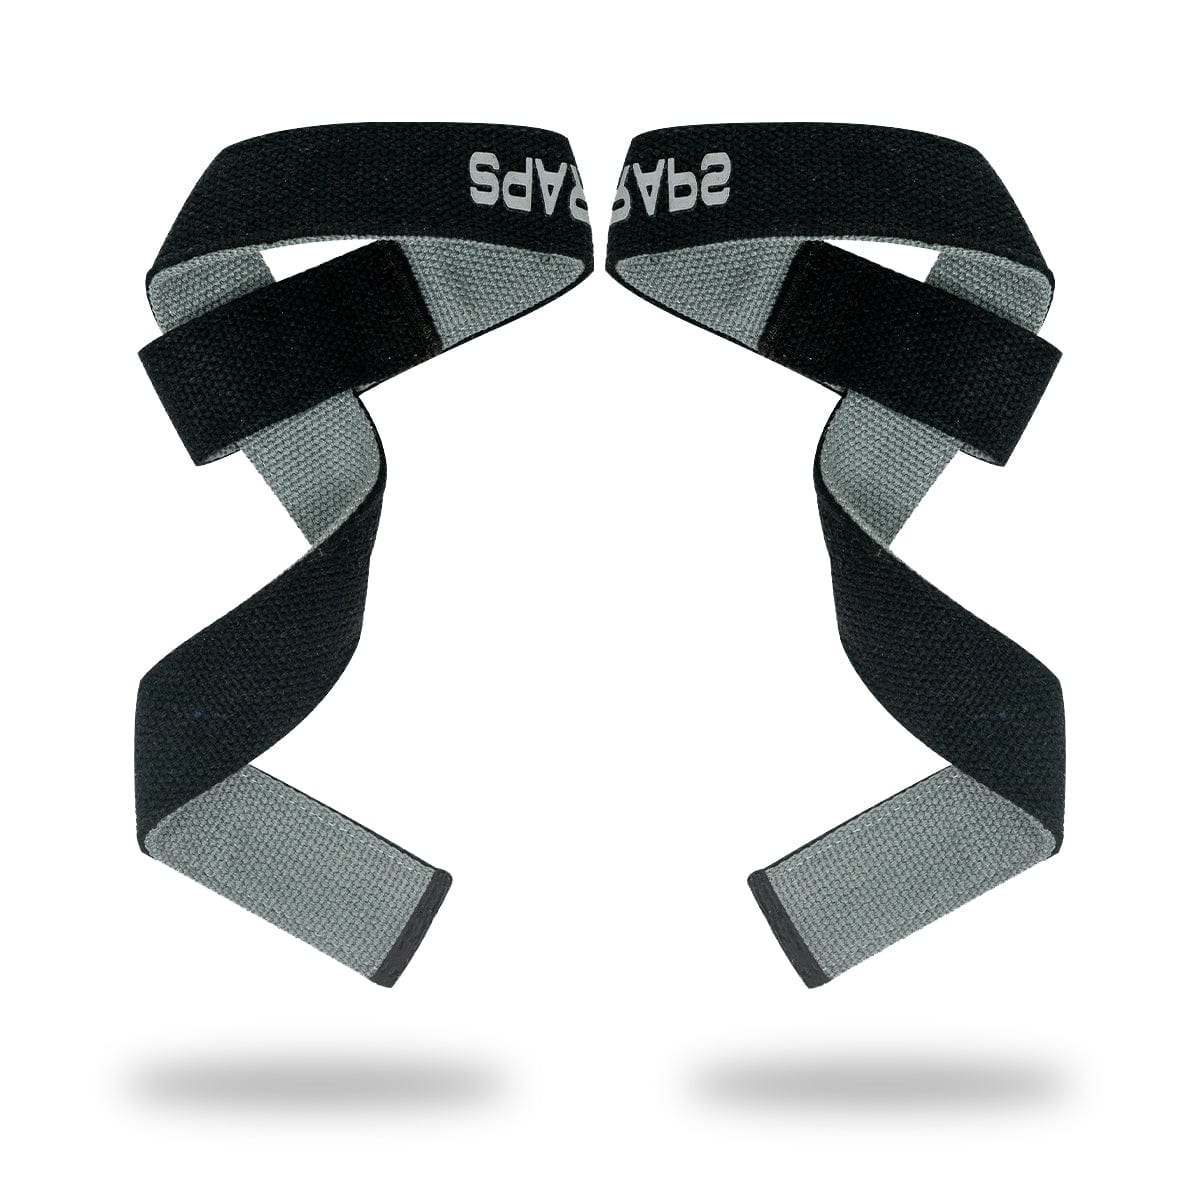 TUFF Figure 8 Lifting Straps  Heavy Duty Weightlifting Straps